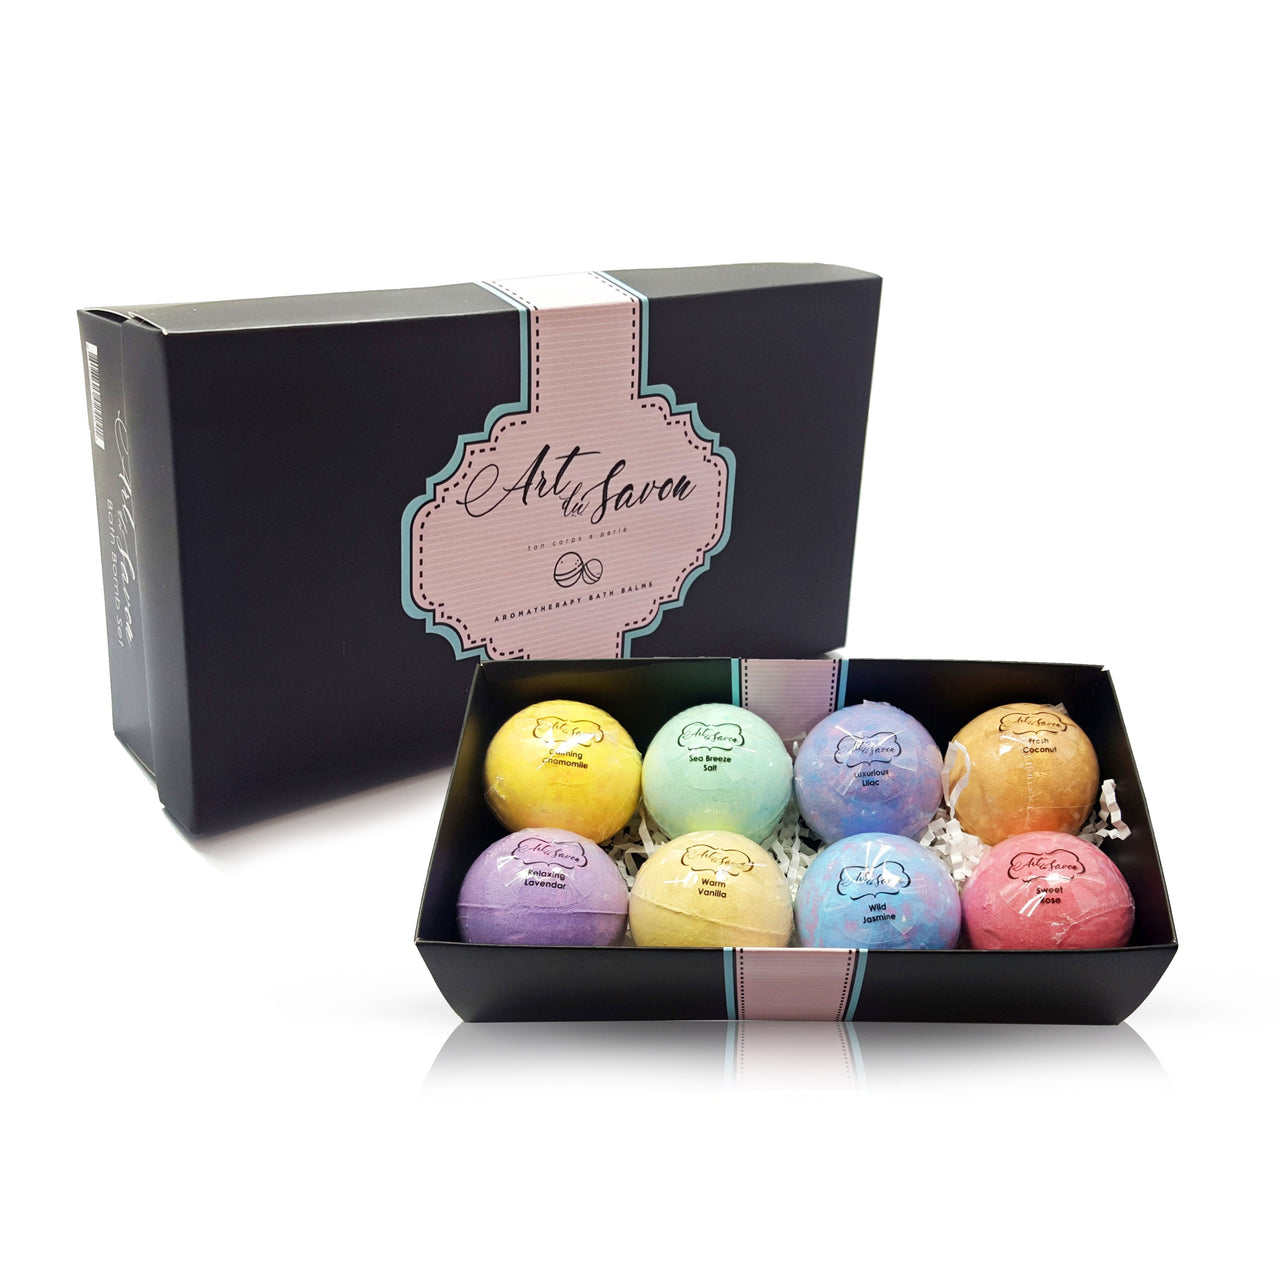 8pc Bath Bomb Luxury Gift Set Uplifting Fragrances Soothes Body and Mind Conditioning Skin with Shea Butter